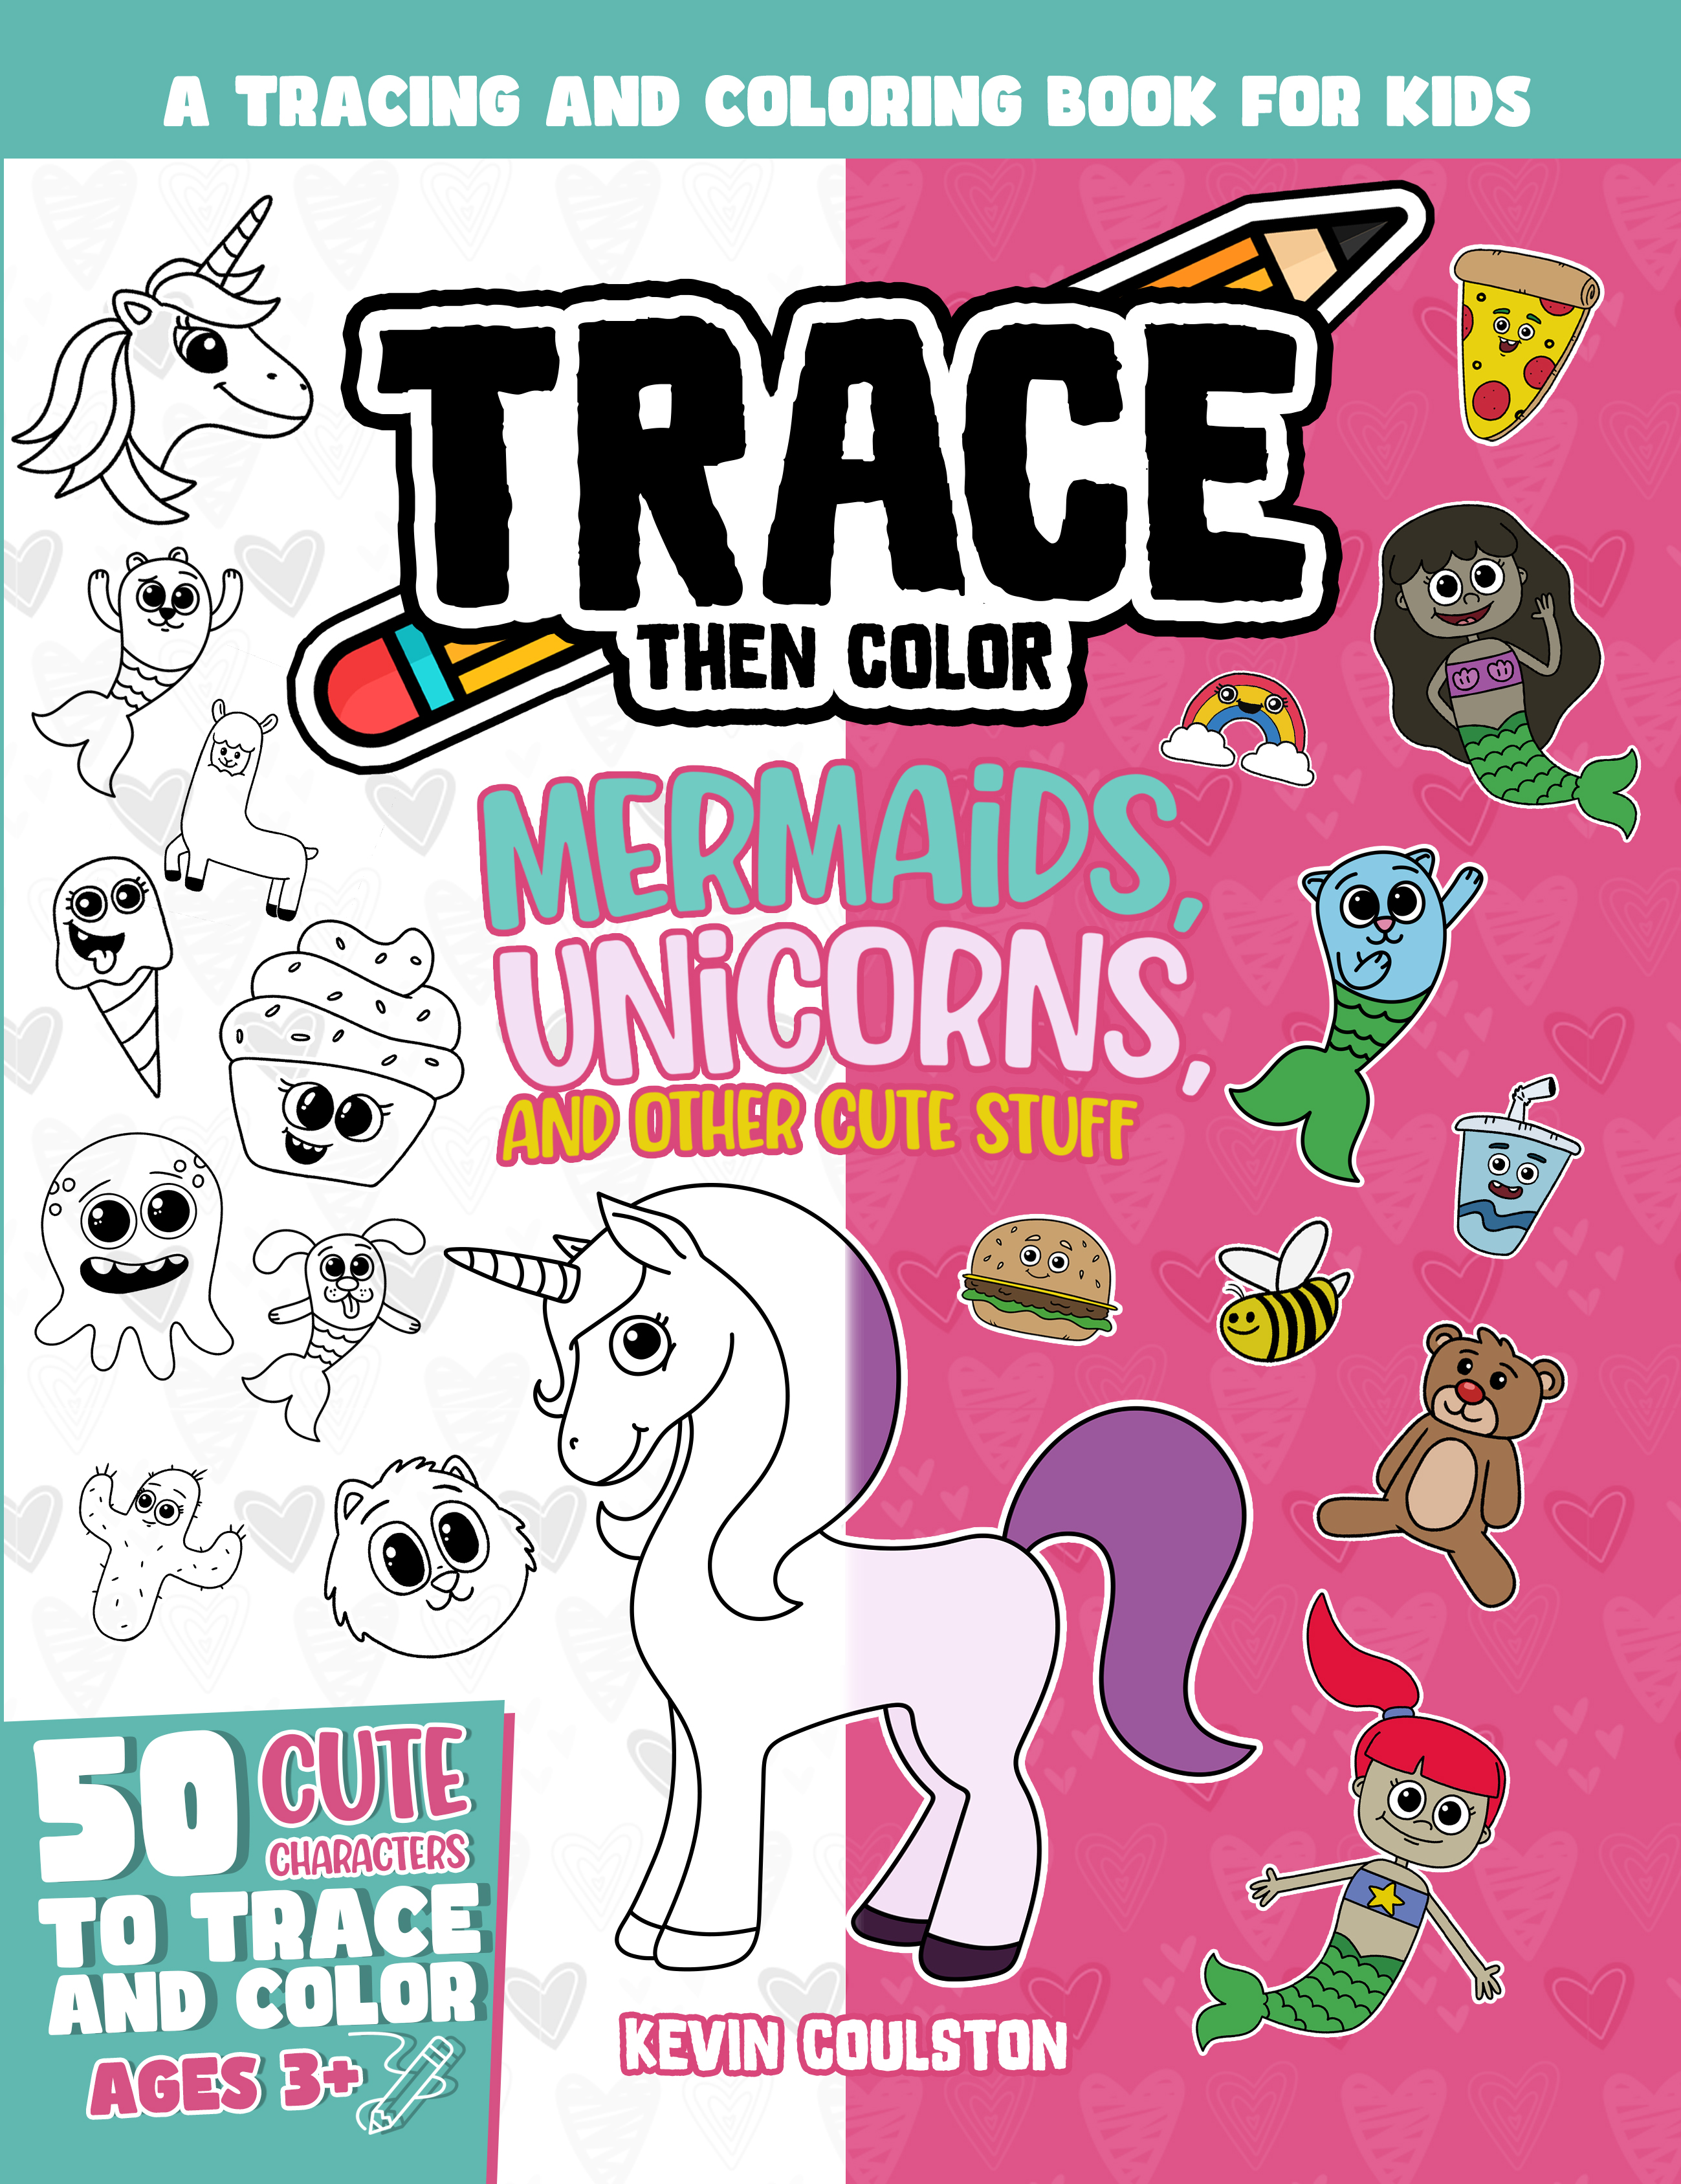 Trace Then Color: Mermaids, Unicorns, and Other Cute Stuff